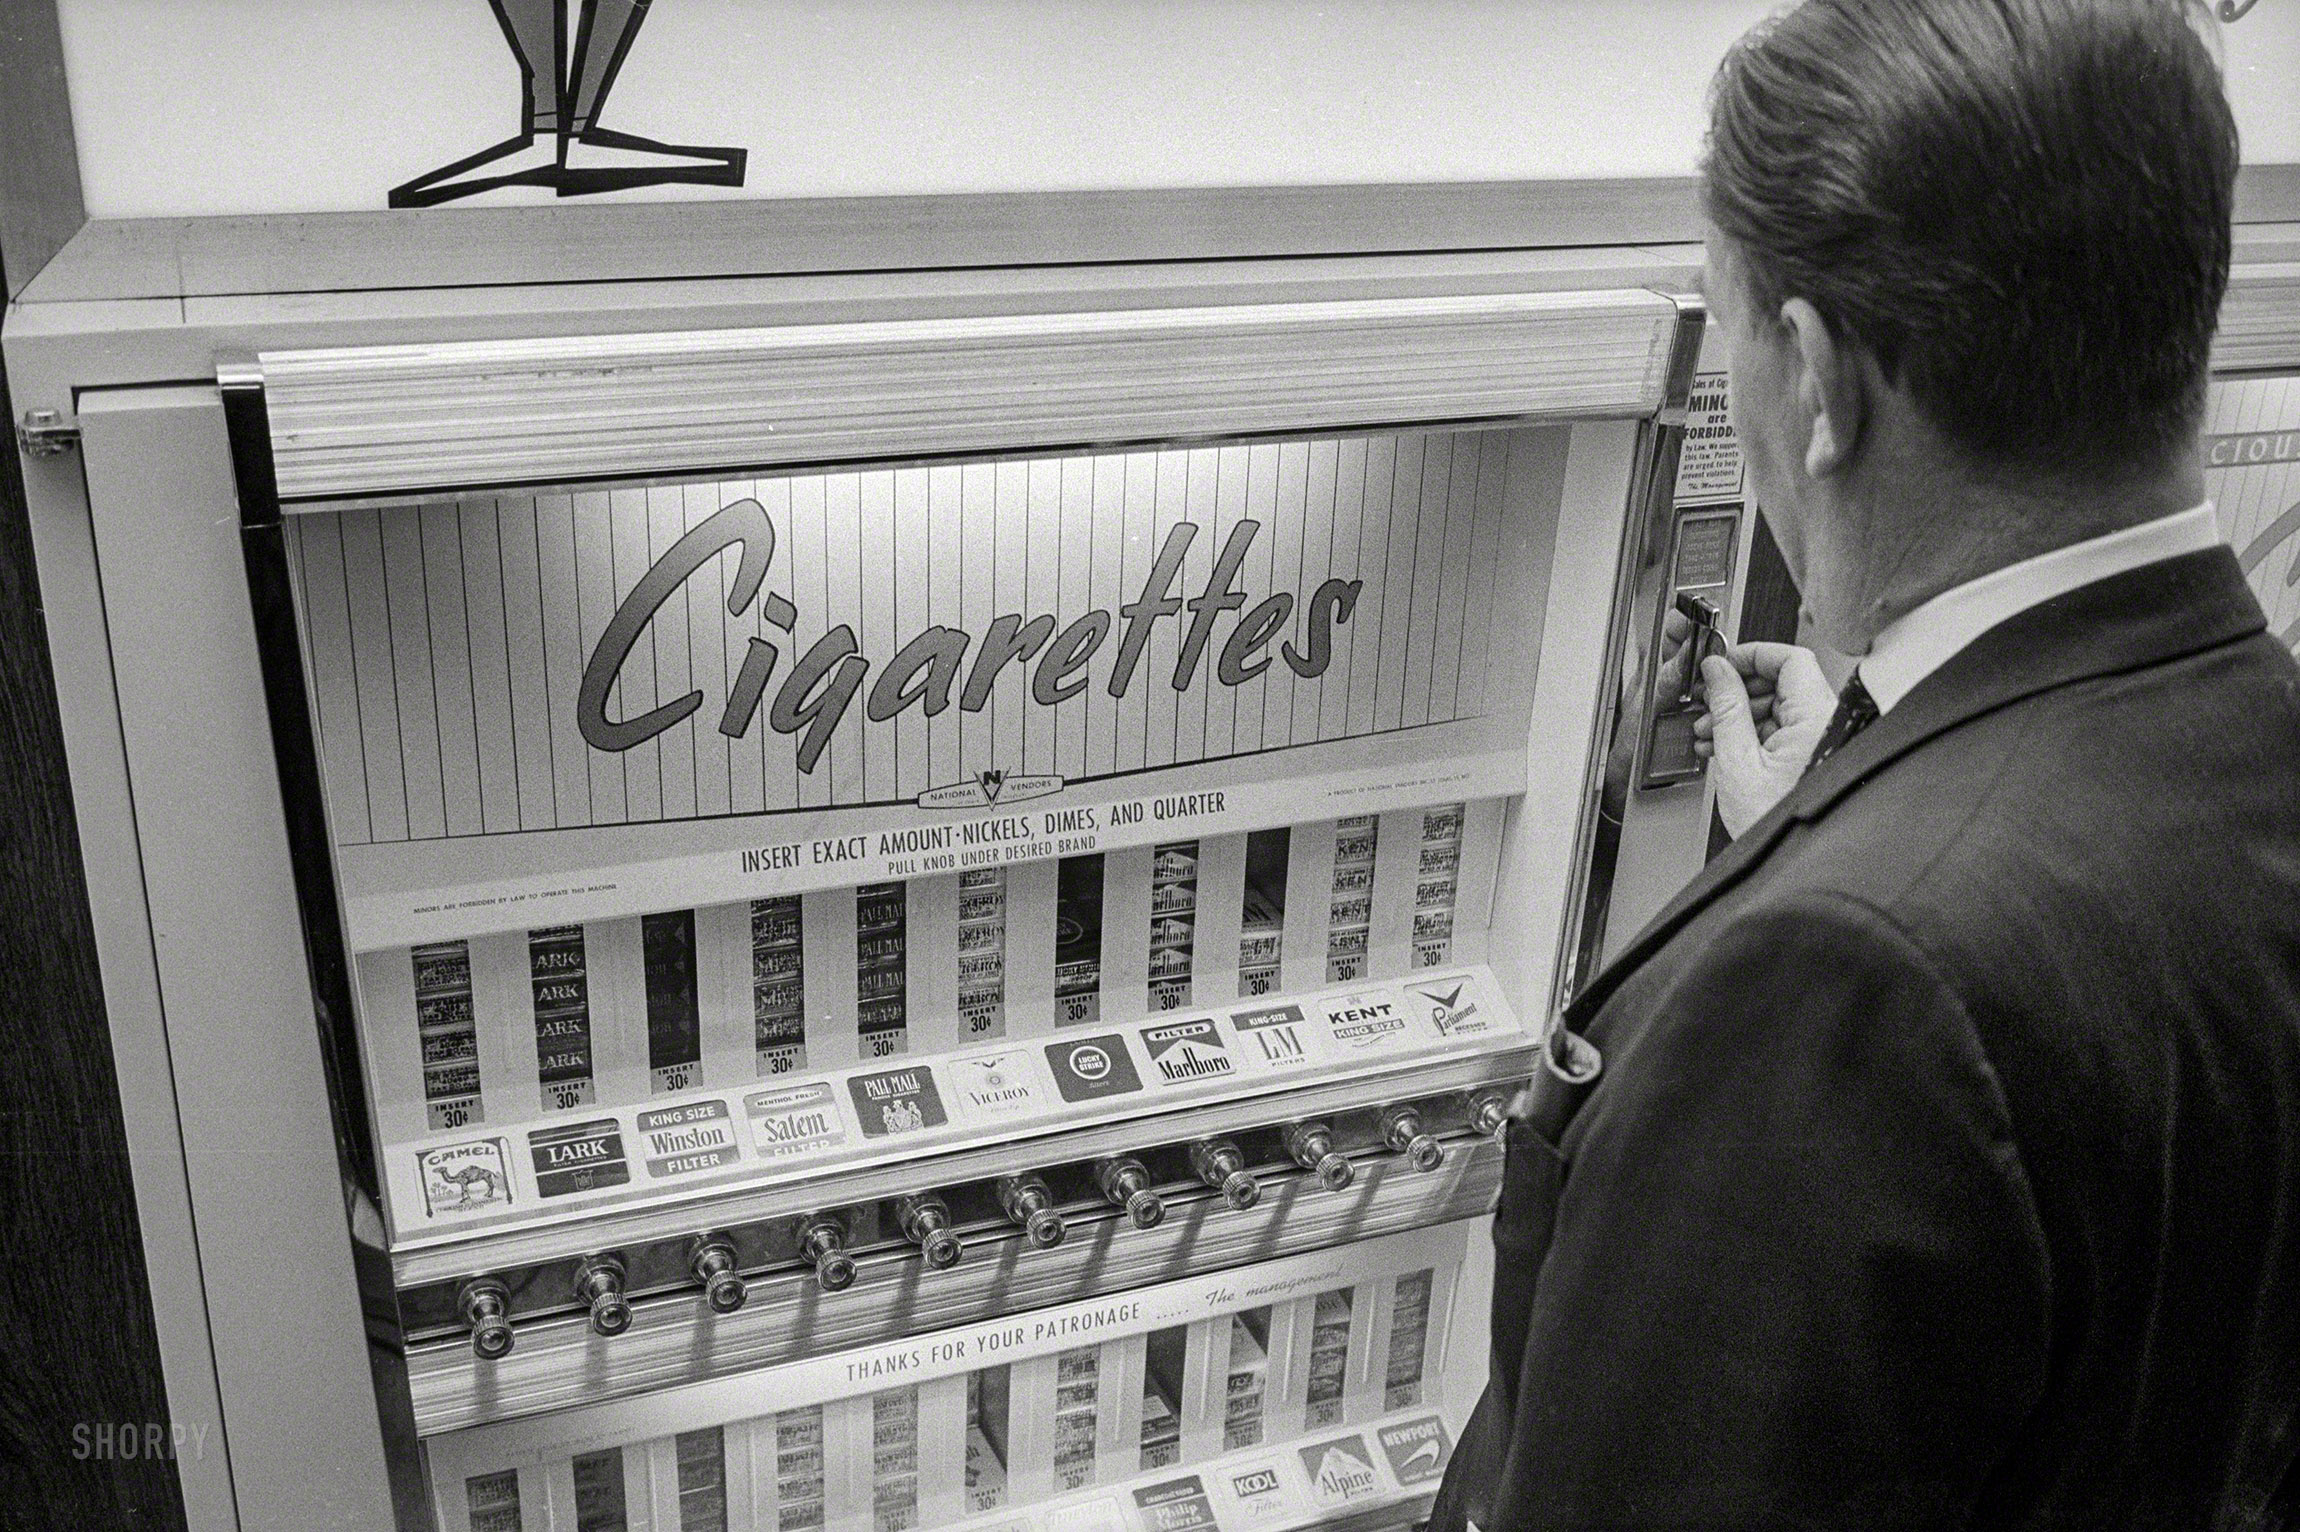 April 20, 1965. "Vending Machines, Cigarettes." 35mm negative by Marion S. Trikosko for U.S. News & World Report. View full size.